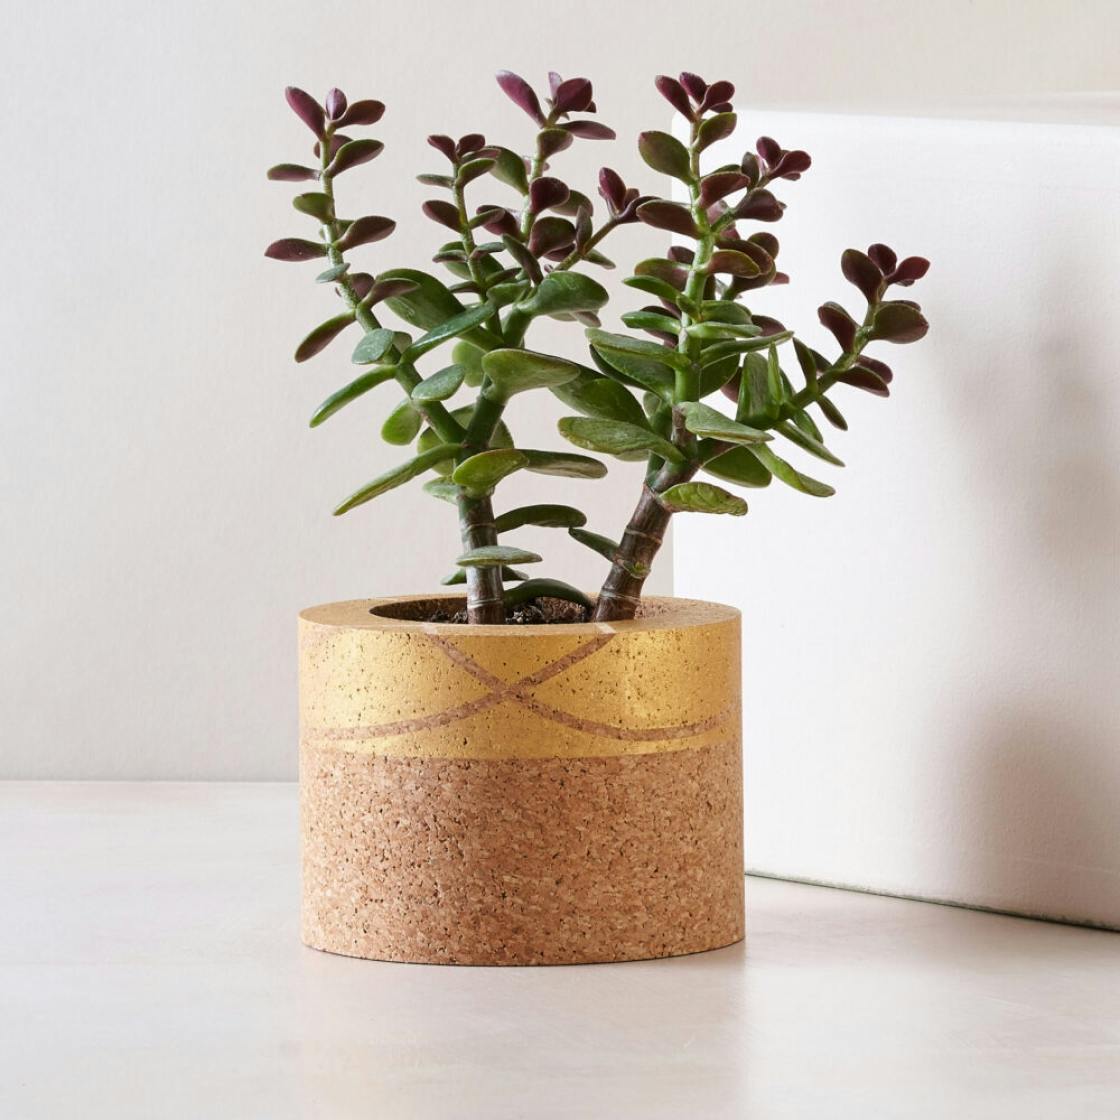 Plant gifts online uk